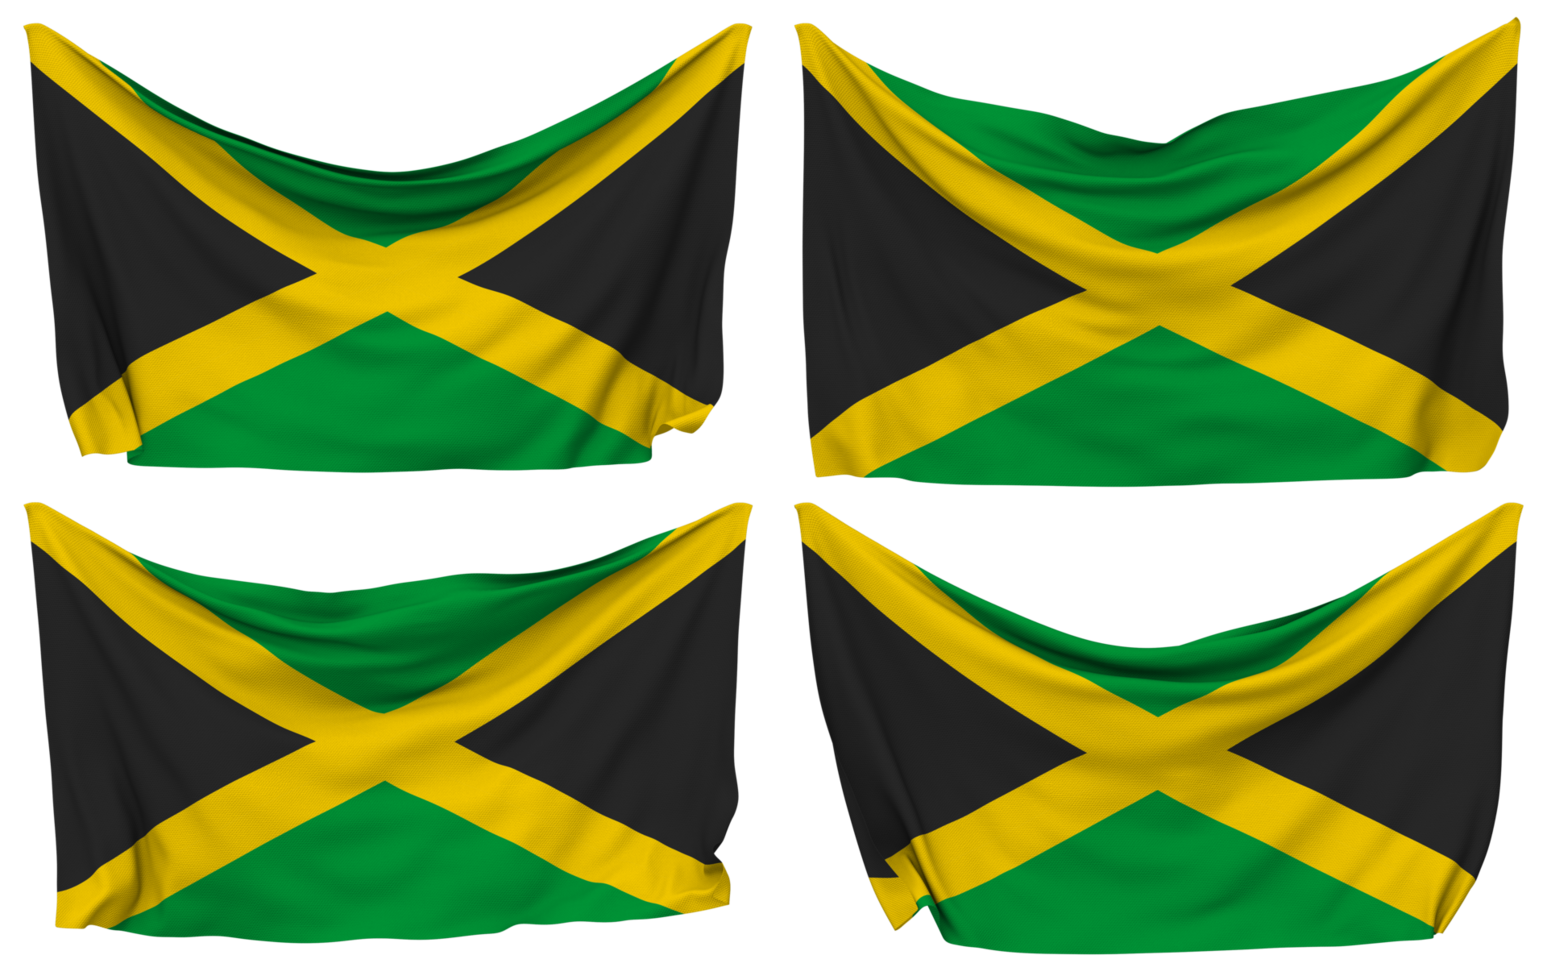 Jamaica Pinned Flag from Corners, Isolated with Different Waving Variations, 3D Rendering png